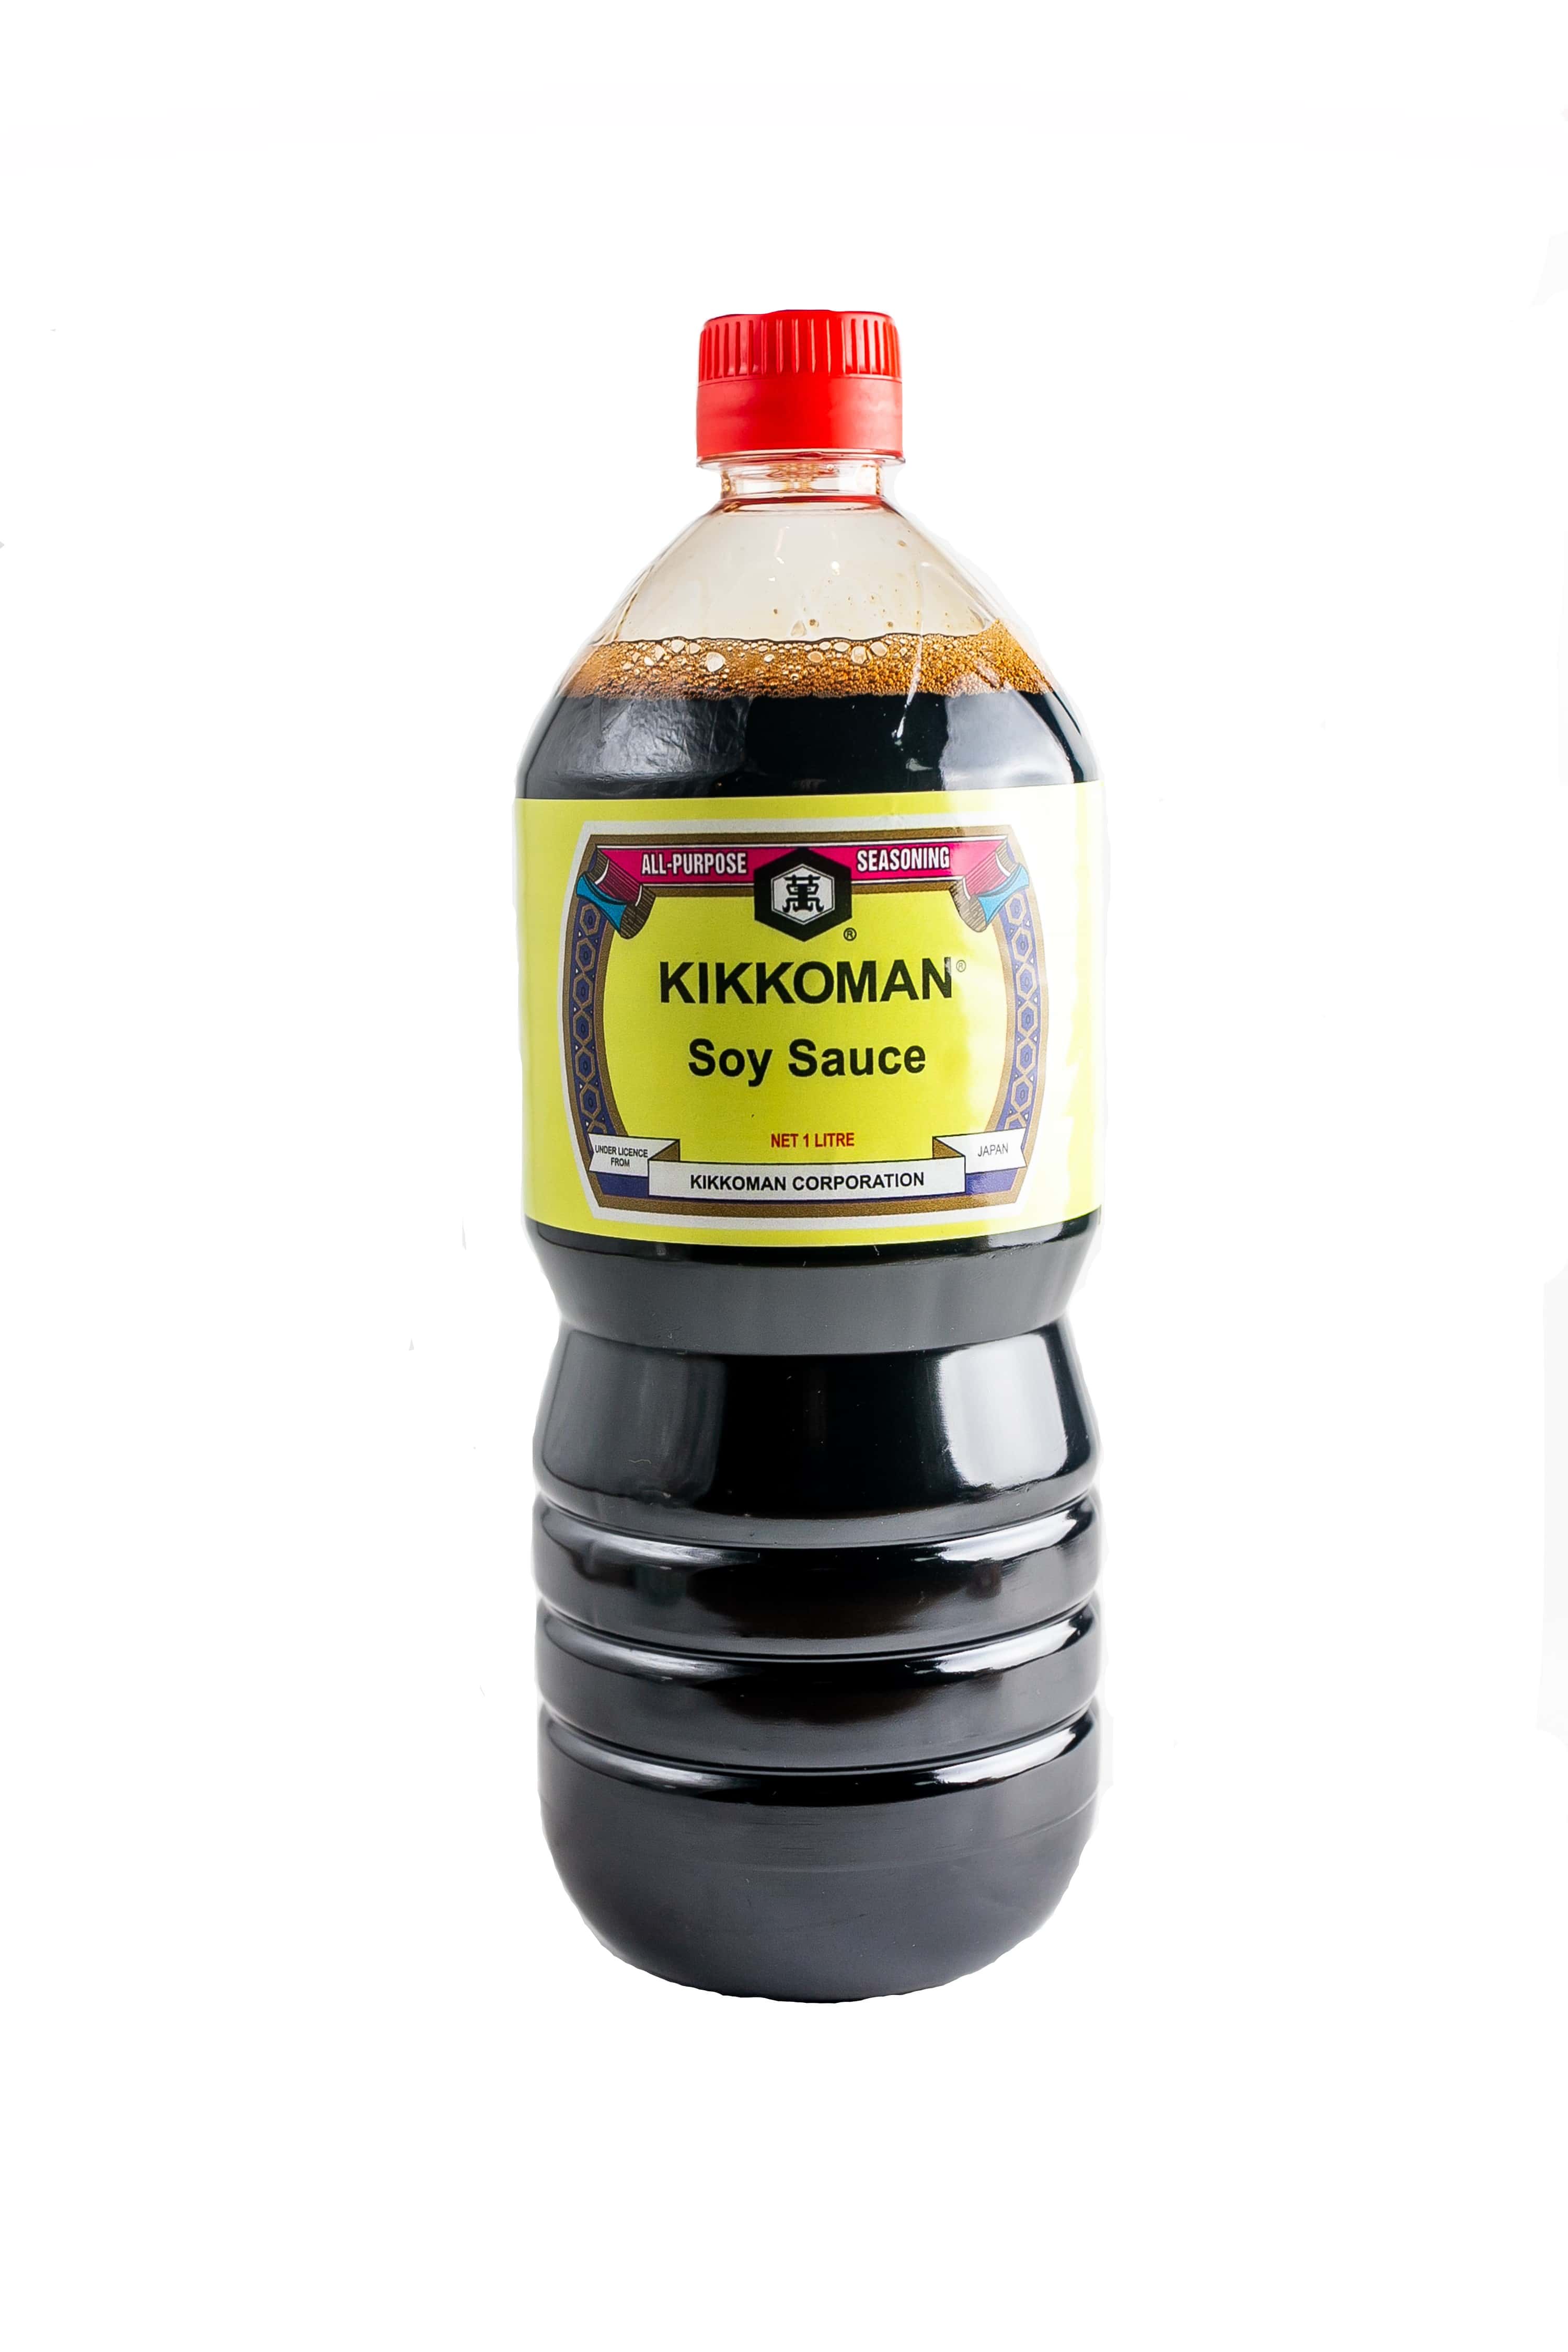 Soy Sauce Kikoman 1lt sauce used in all kitchens. It is especially popular in Japanese and Chinese cuisine. Sushi and Rolls are the main sauce to eat.